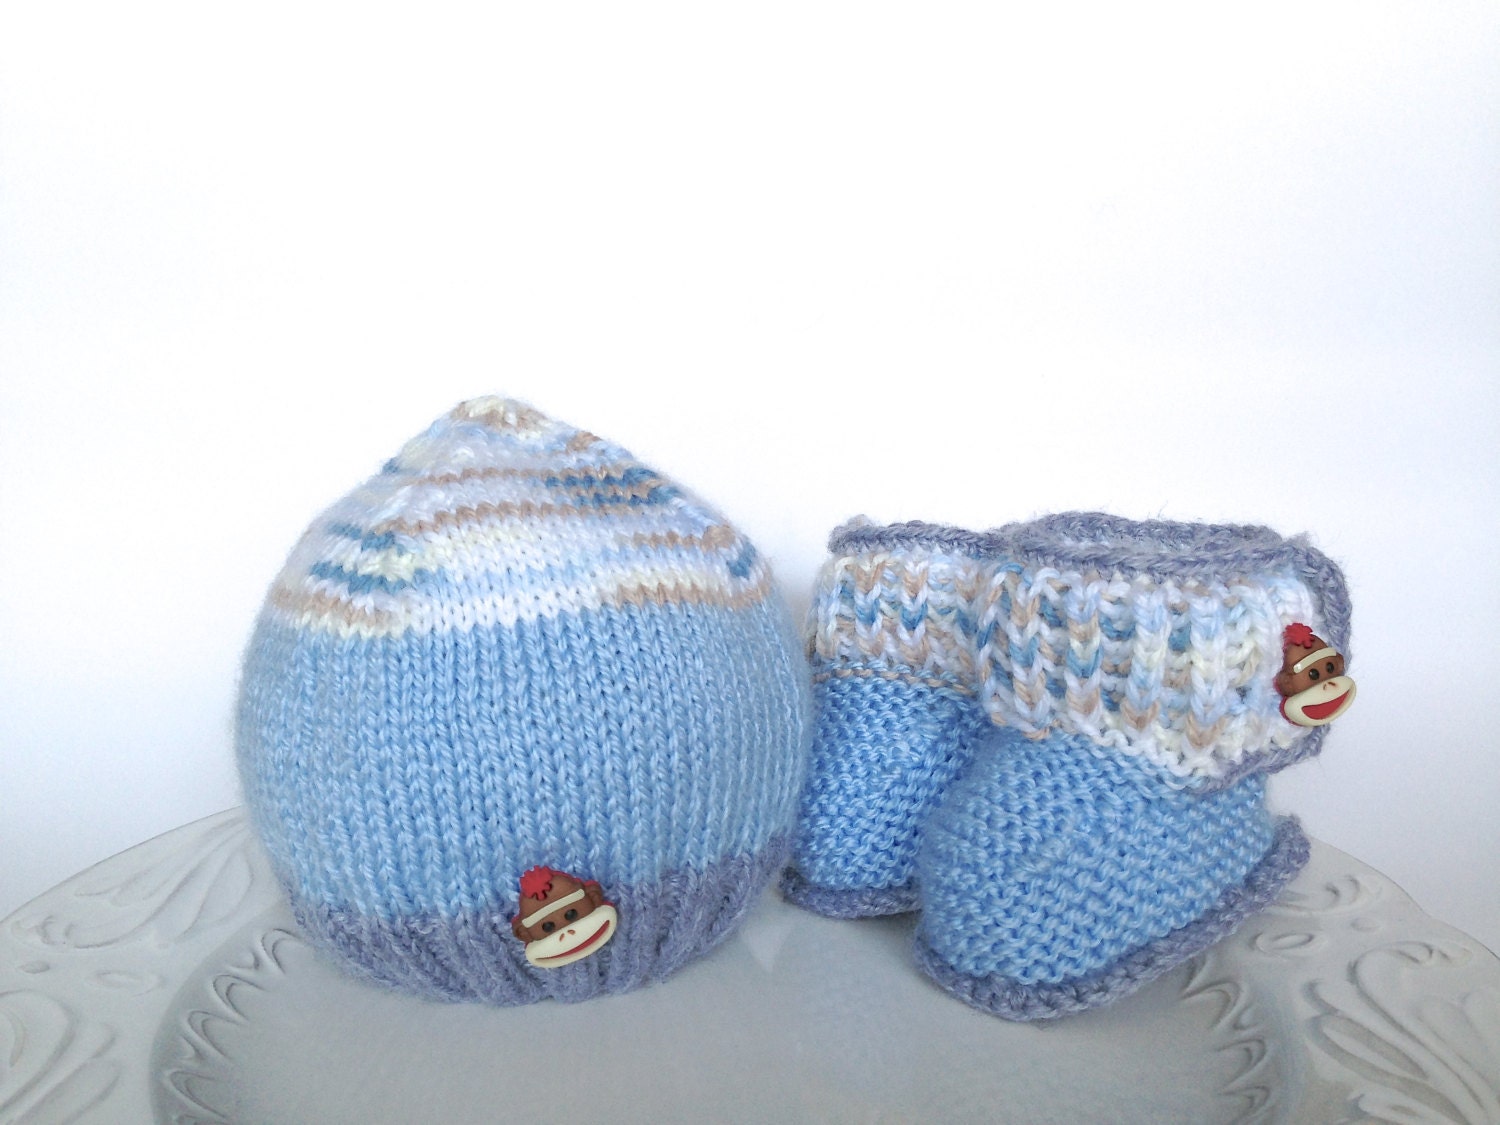 Hand knitted set for baby boy - hat and booties, ready to ship - TinyLoveGifts